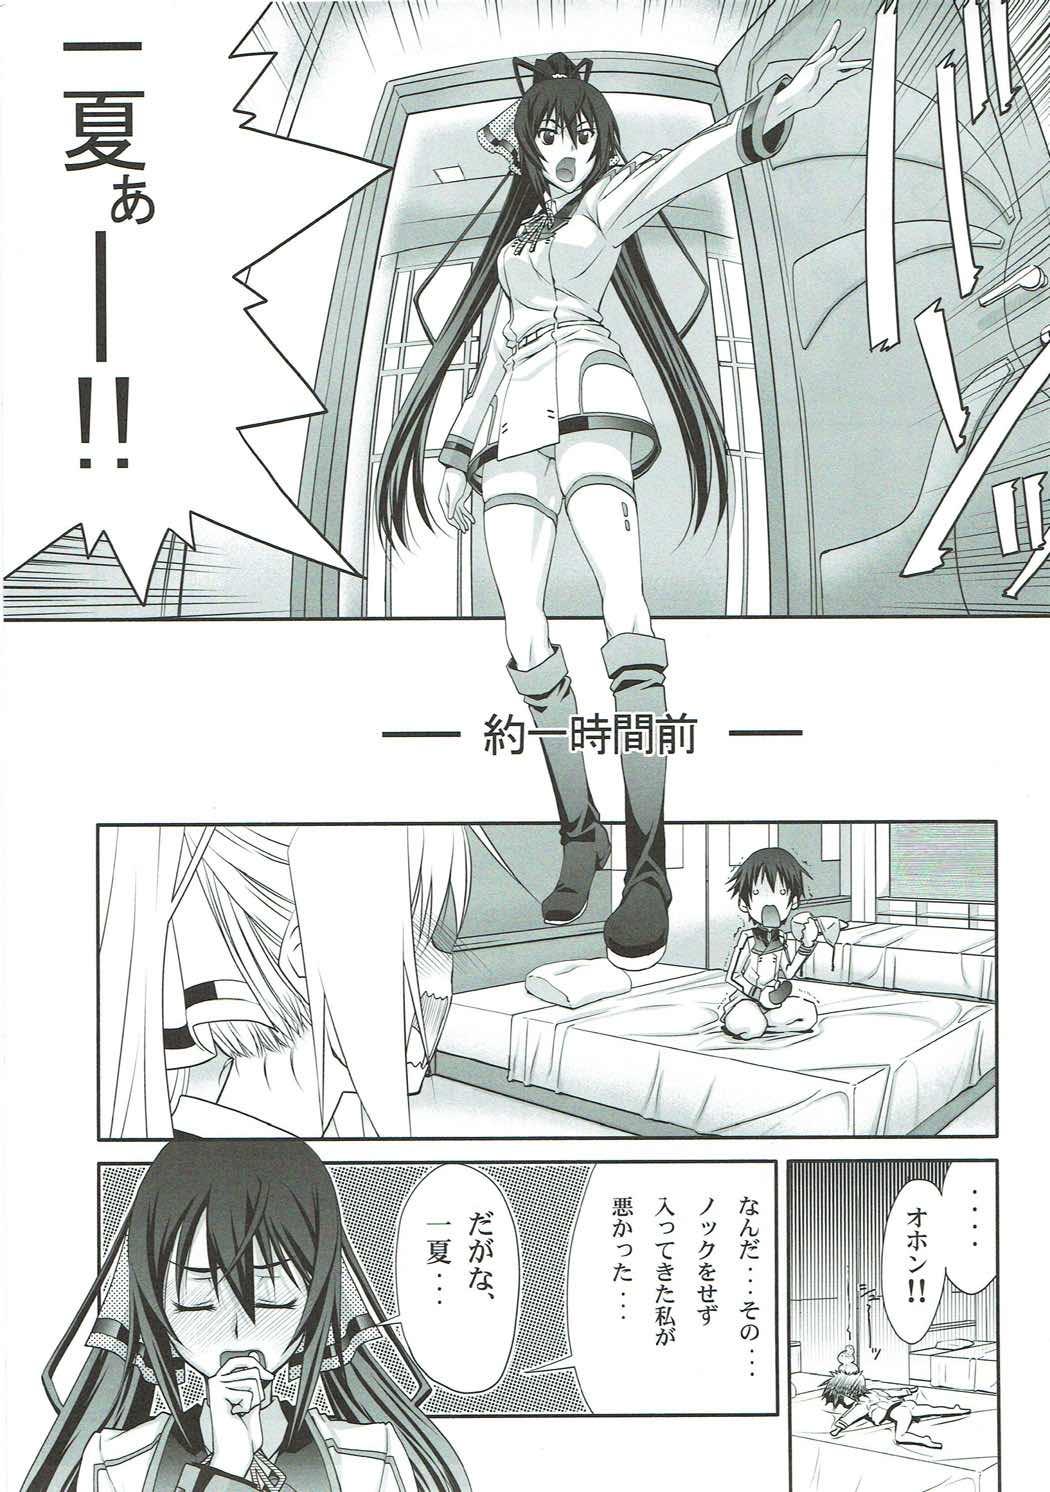 Verification Stairway16 - Sword art online Infinite stratos Accel world Gangbang - Page 6